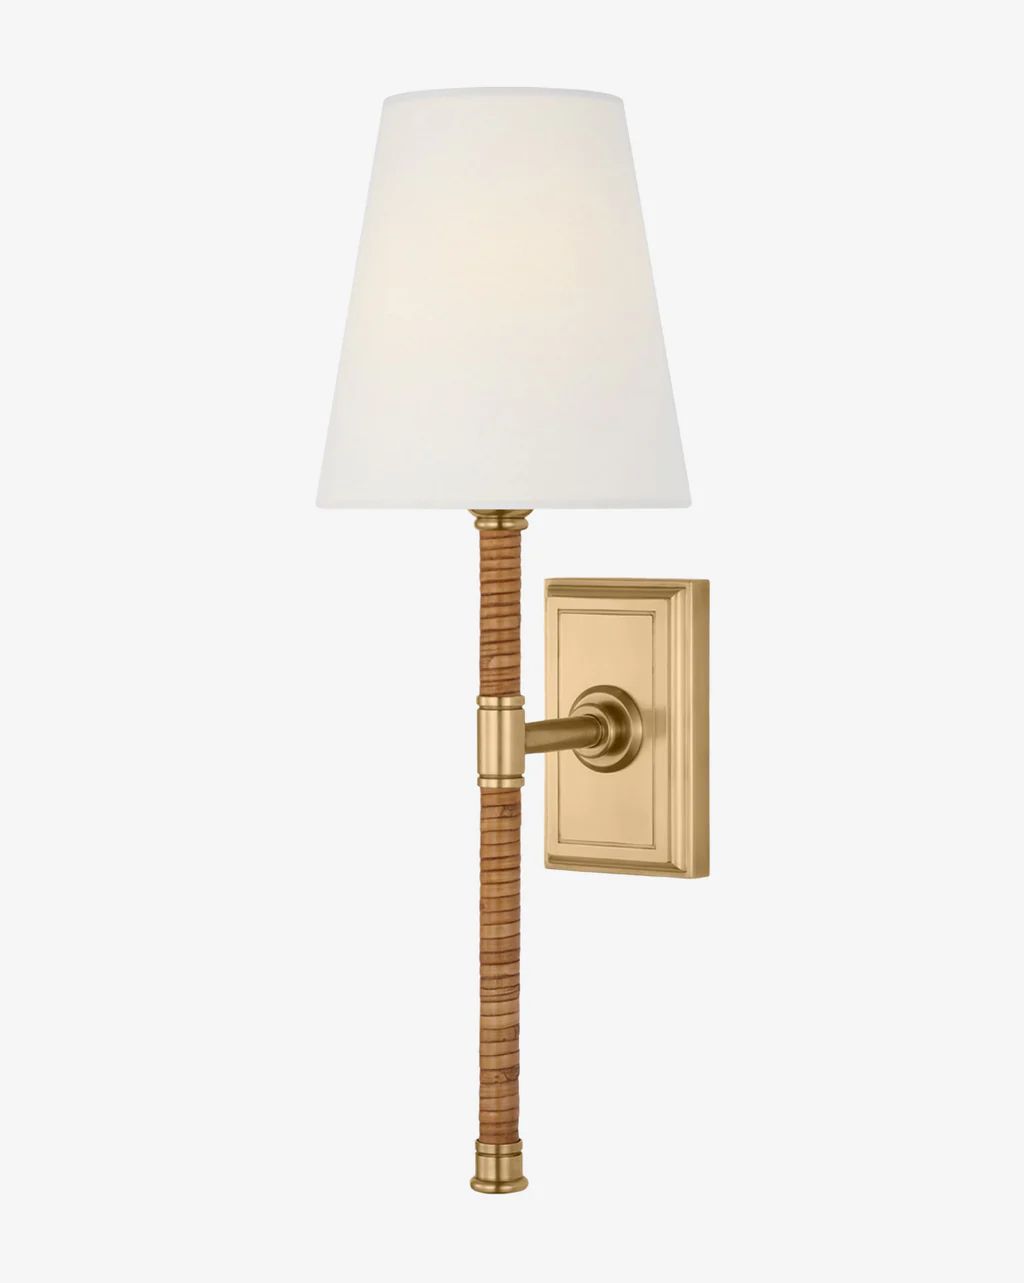 Basden Tail Sconce | McGee & Co.